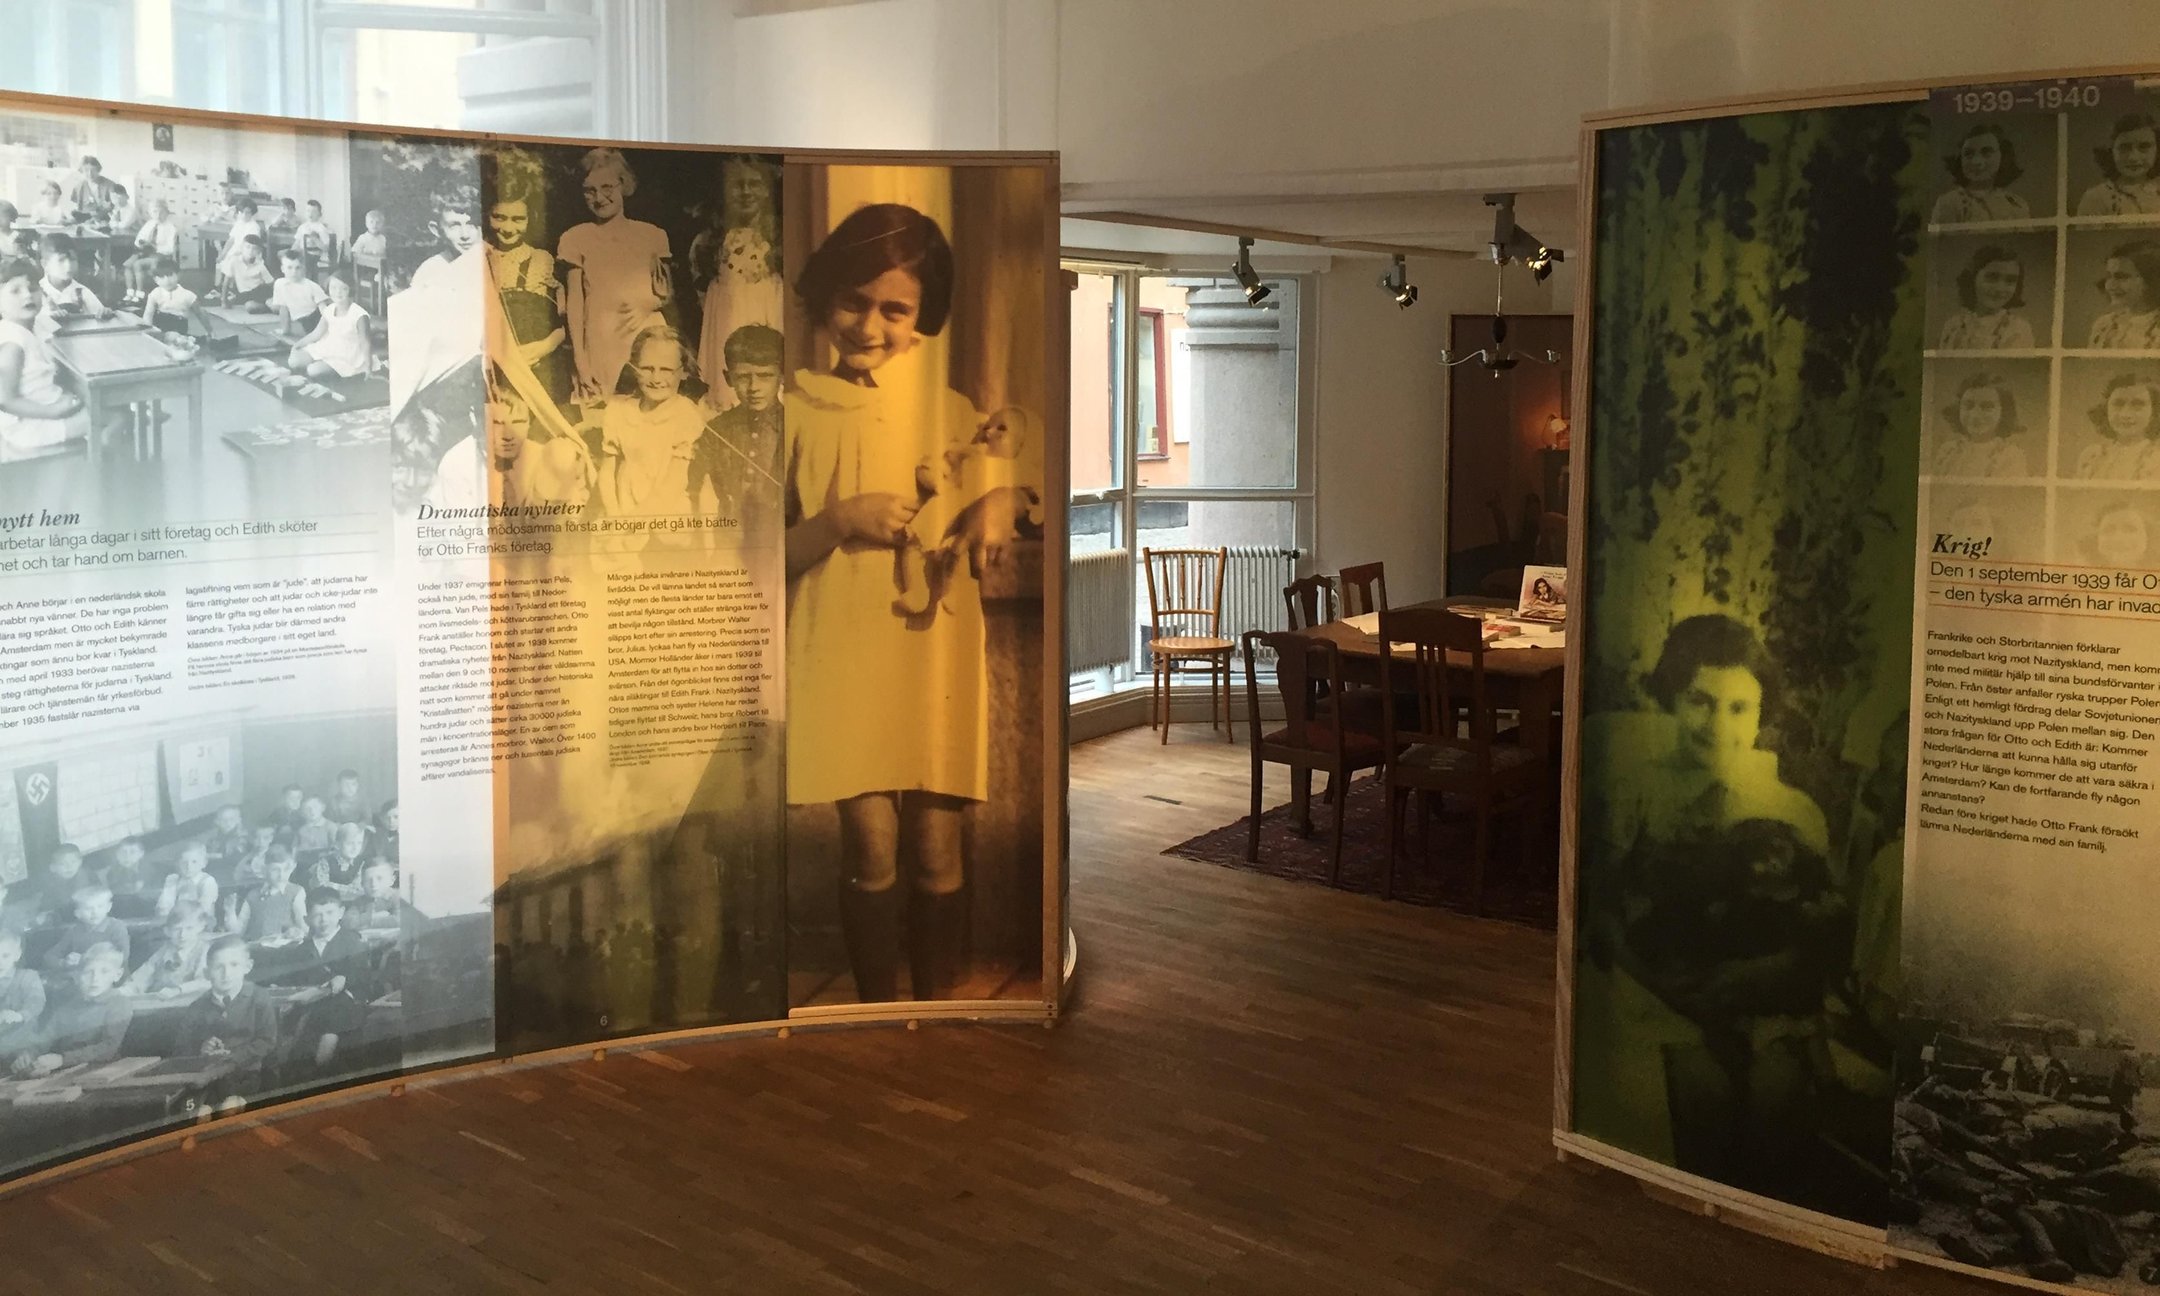 The Anne Frank exhibition in The Living History Forum in Stockholm (February 2016)